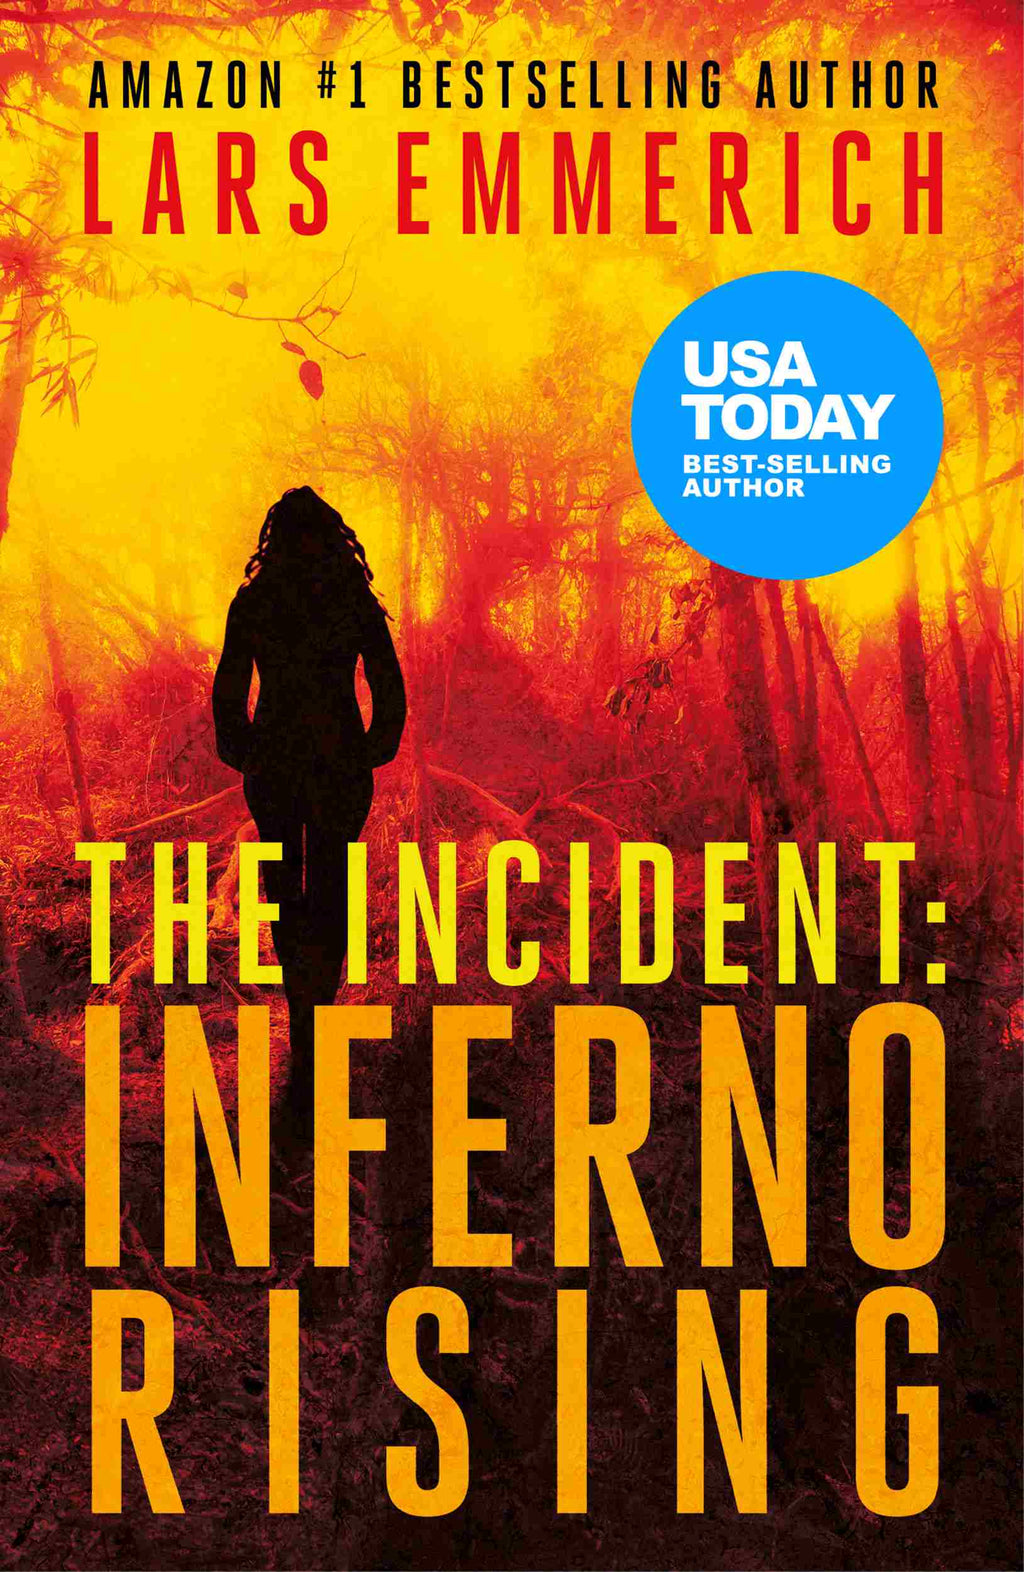 The Incident: Inferno Rising (Paperback)